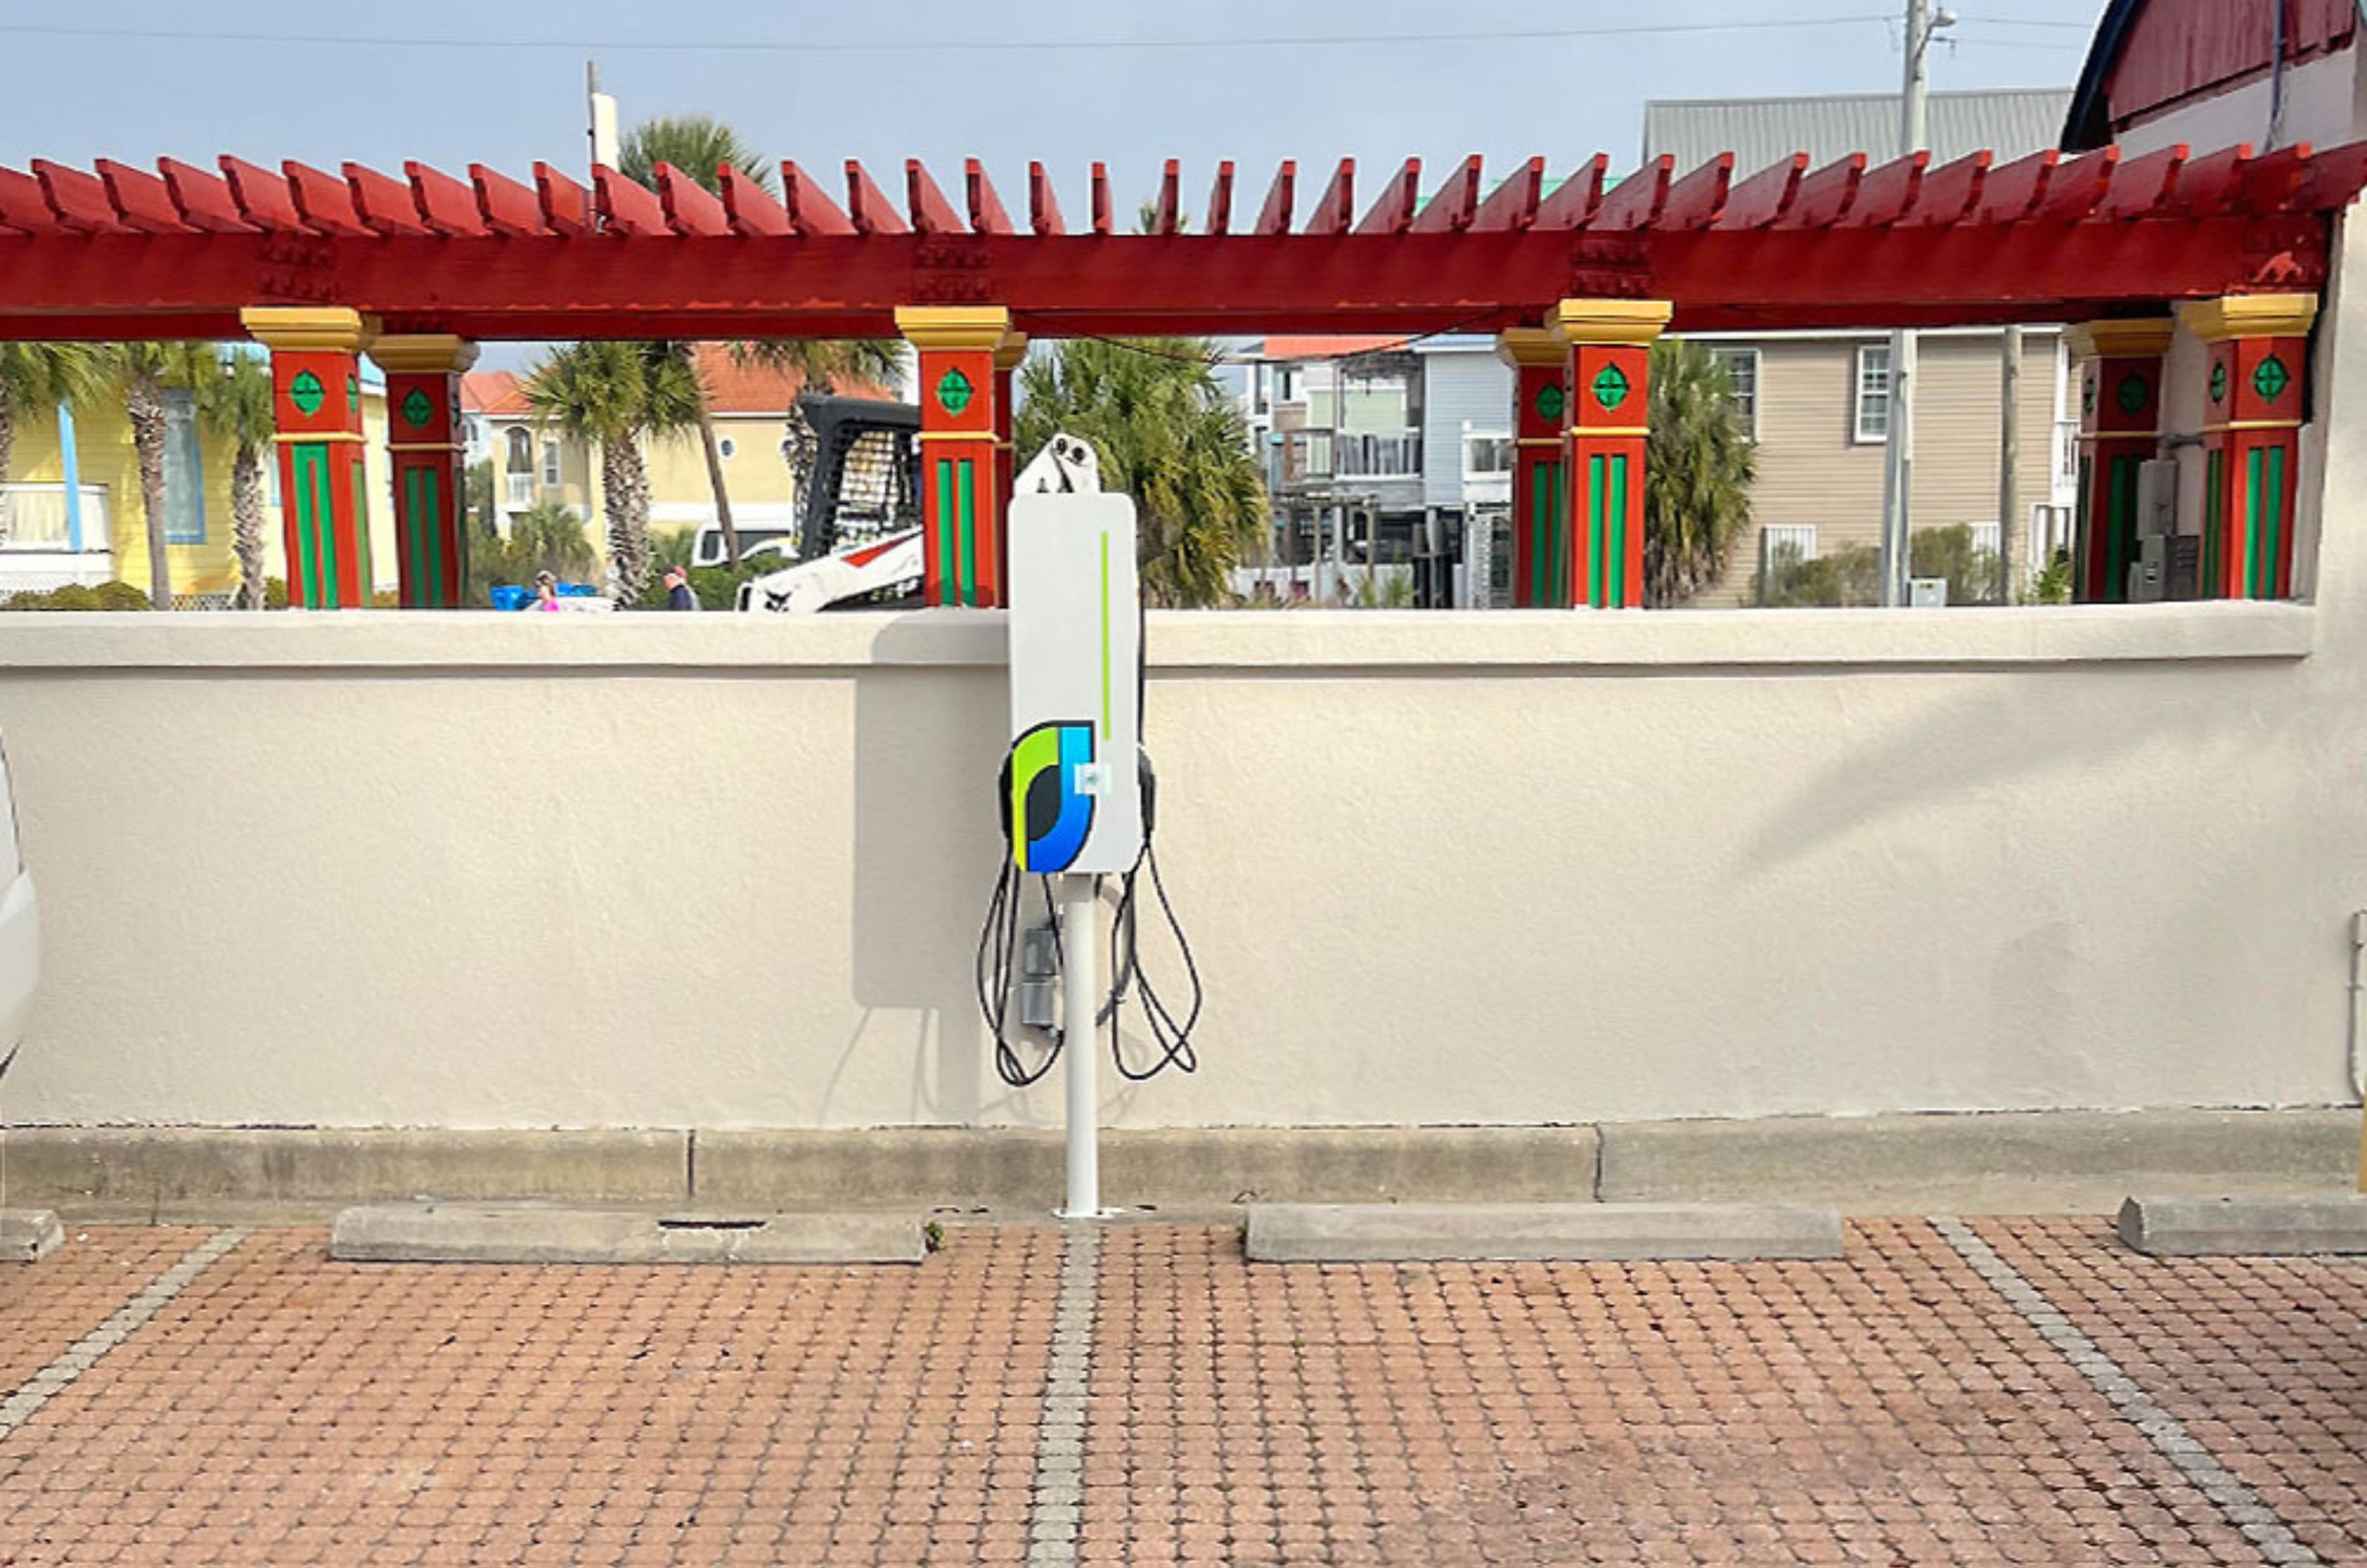 Electric vehicle charger in the parking lot 